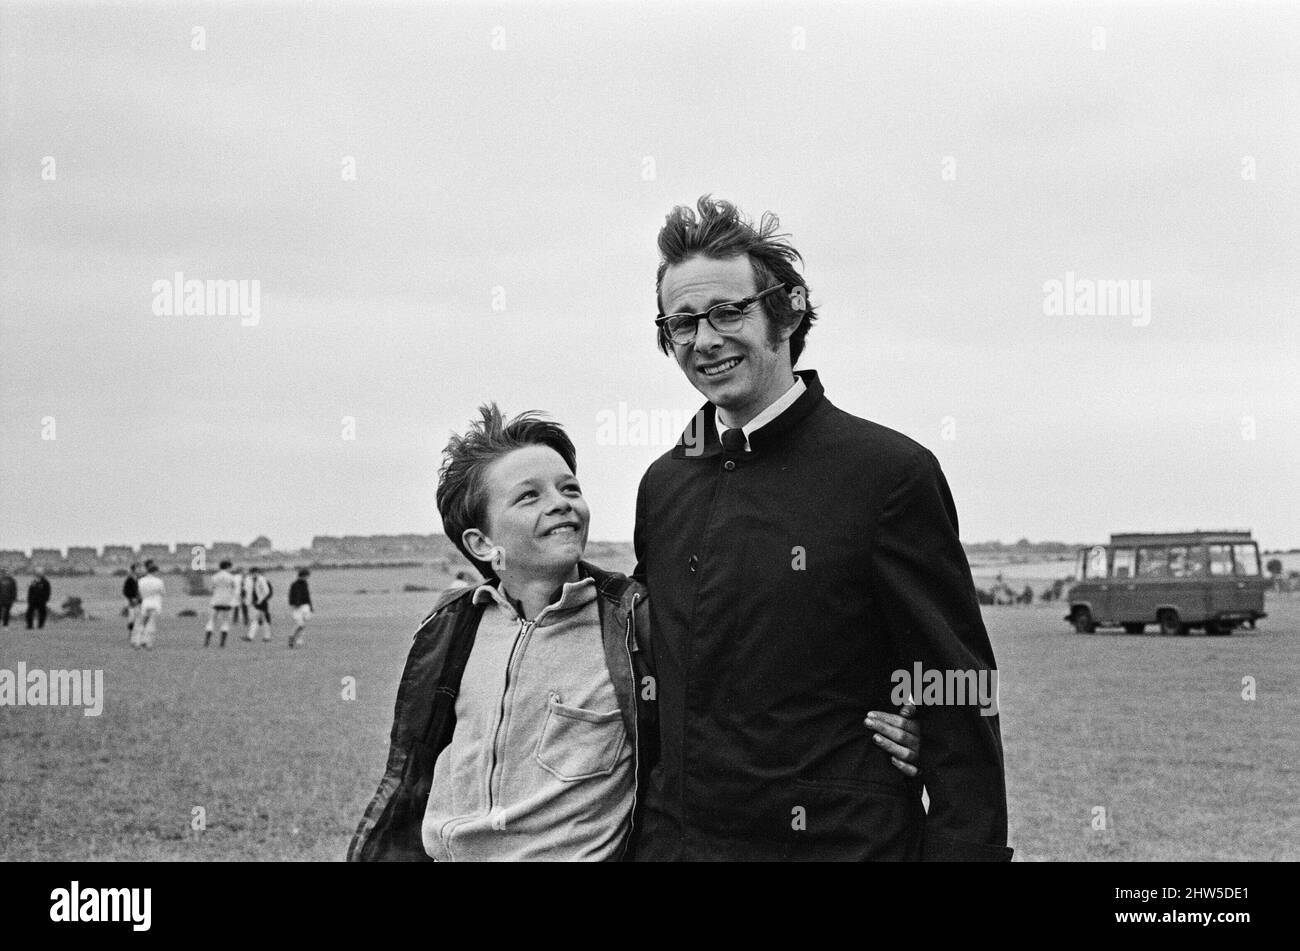 Ken Loach, (film director) on the school football playing field, during the filming of the football scene in the film Kes. Here he is pictured with David Bradley, (aged 14) plays the part of Billy Casper.  Kes is a 1969 release drama film directed by Ken Loach and produced by Tony Garnett. The film is based on the 1968 novel A Kestrel for a Knave, written by the Barnsley-born author Barry Hines. The film is ranked seventh in the British Film Institute's Top Ten (British) Films and among the top ten in its list of the 50 films you should see by the age of 14.     The film was shot on location a Stock Photo